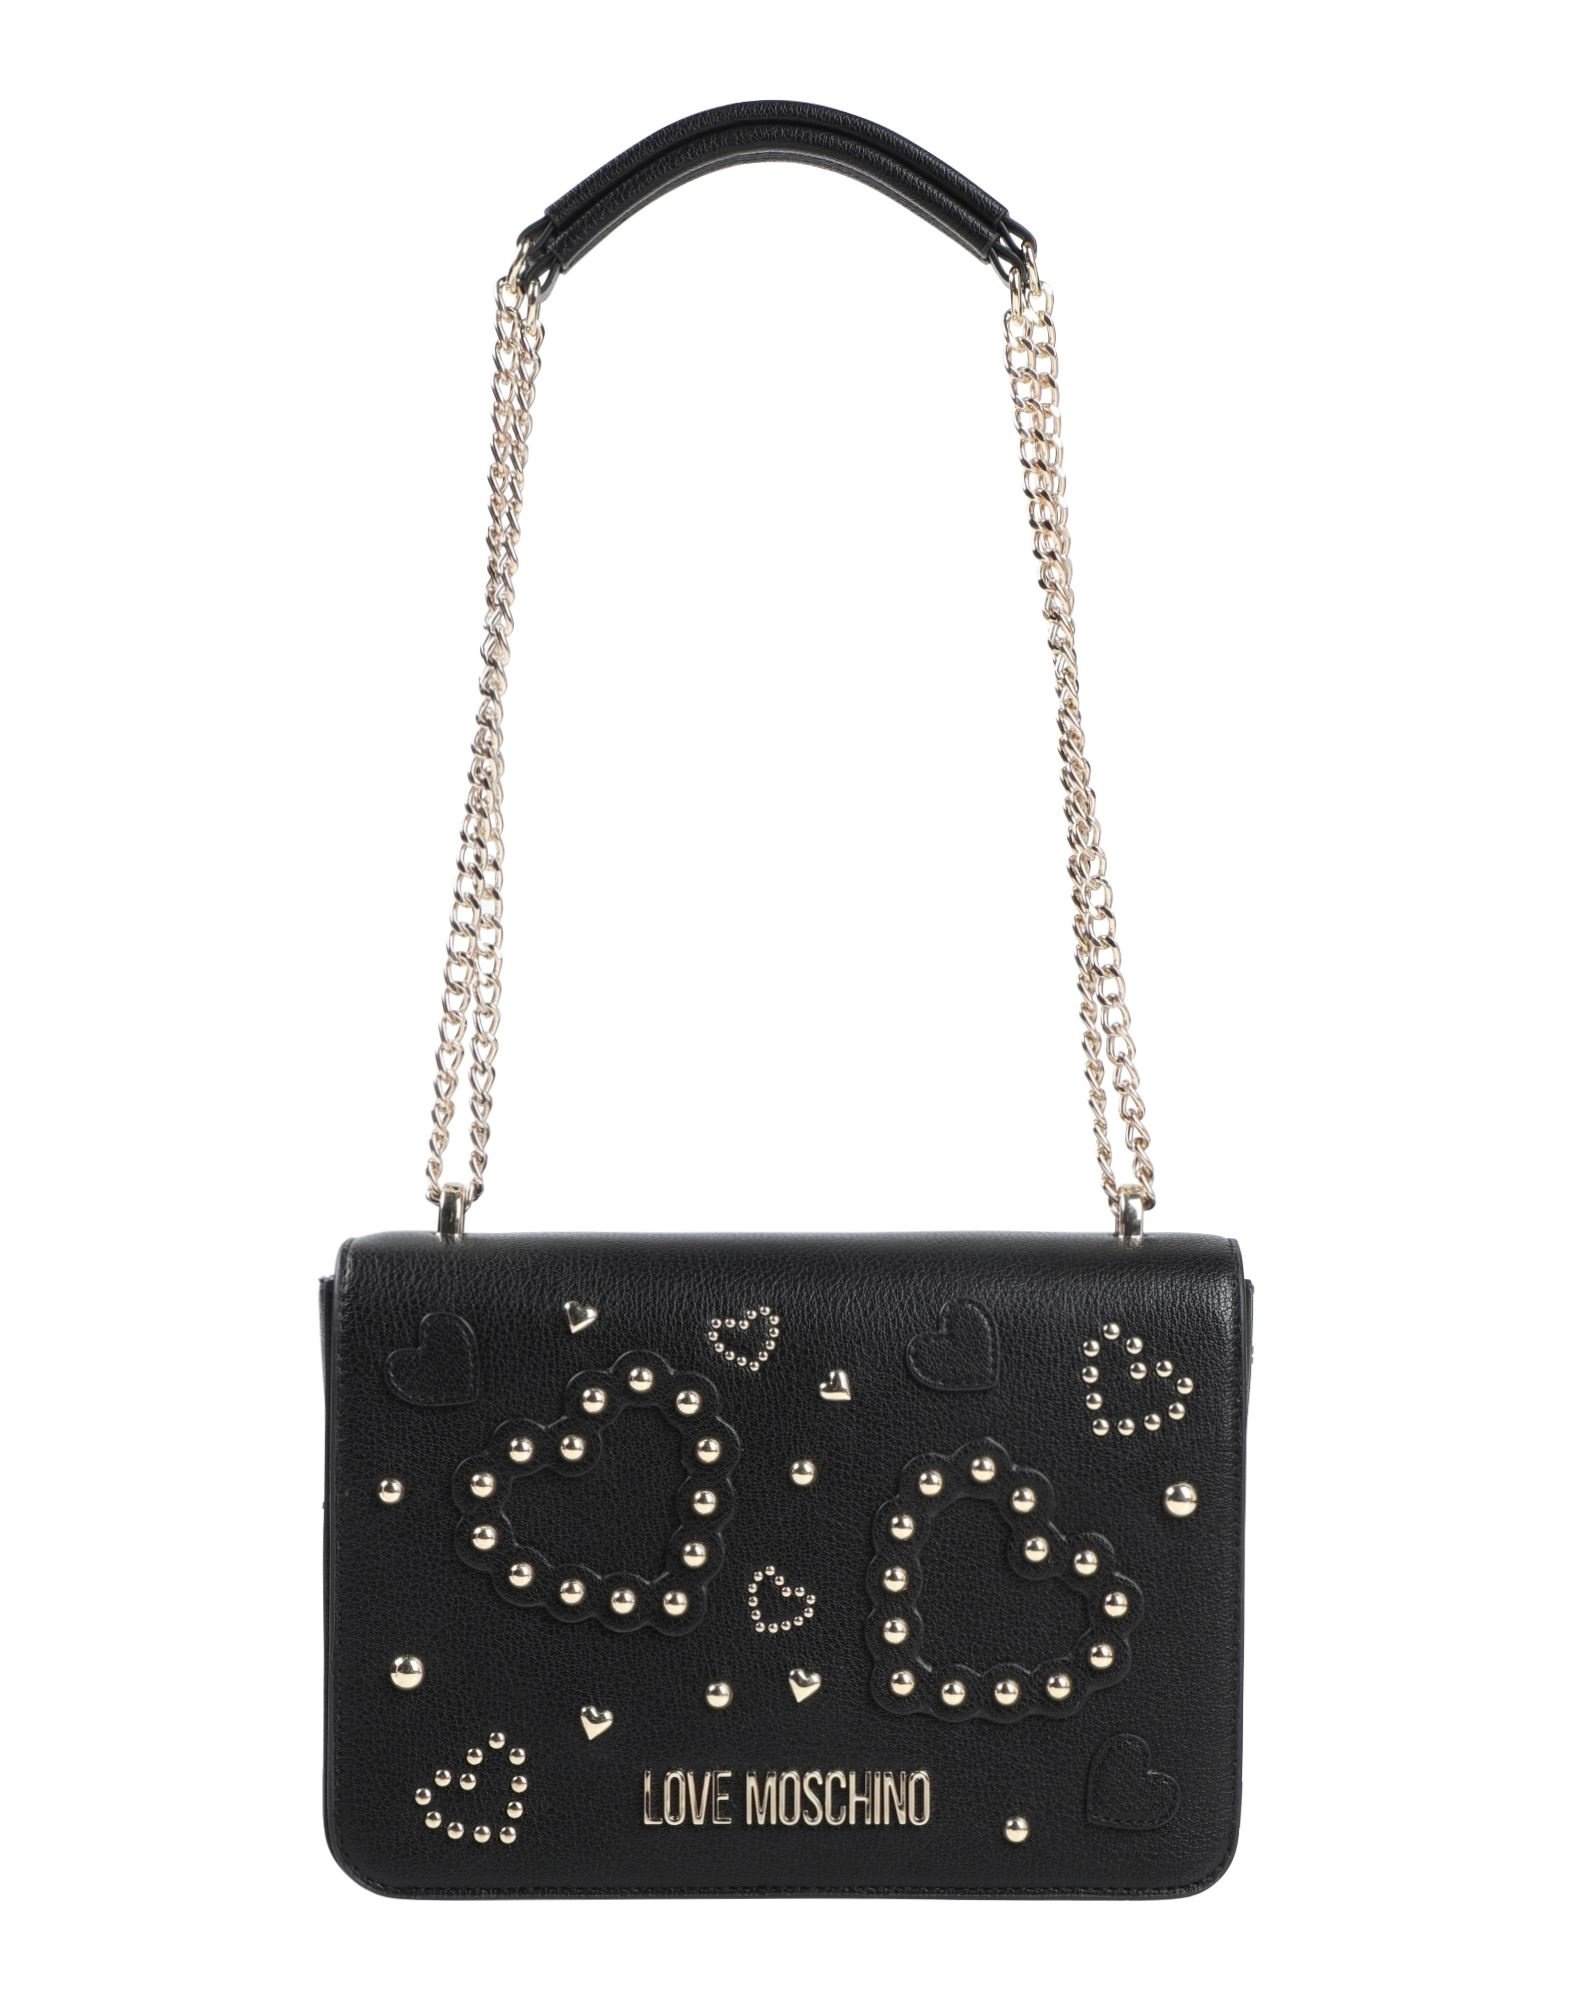 LOVE MOSCHINO Shoulder bags - Item 45552949